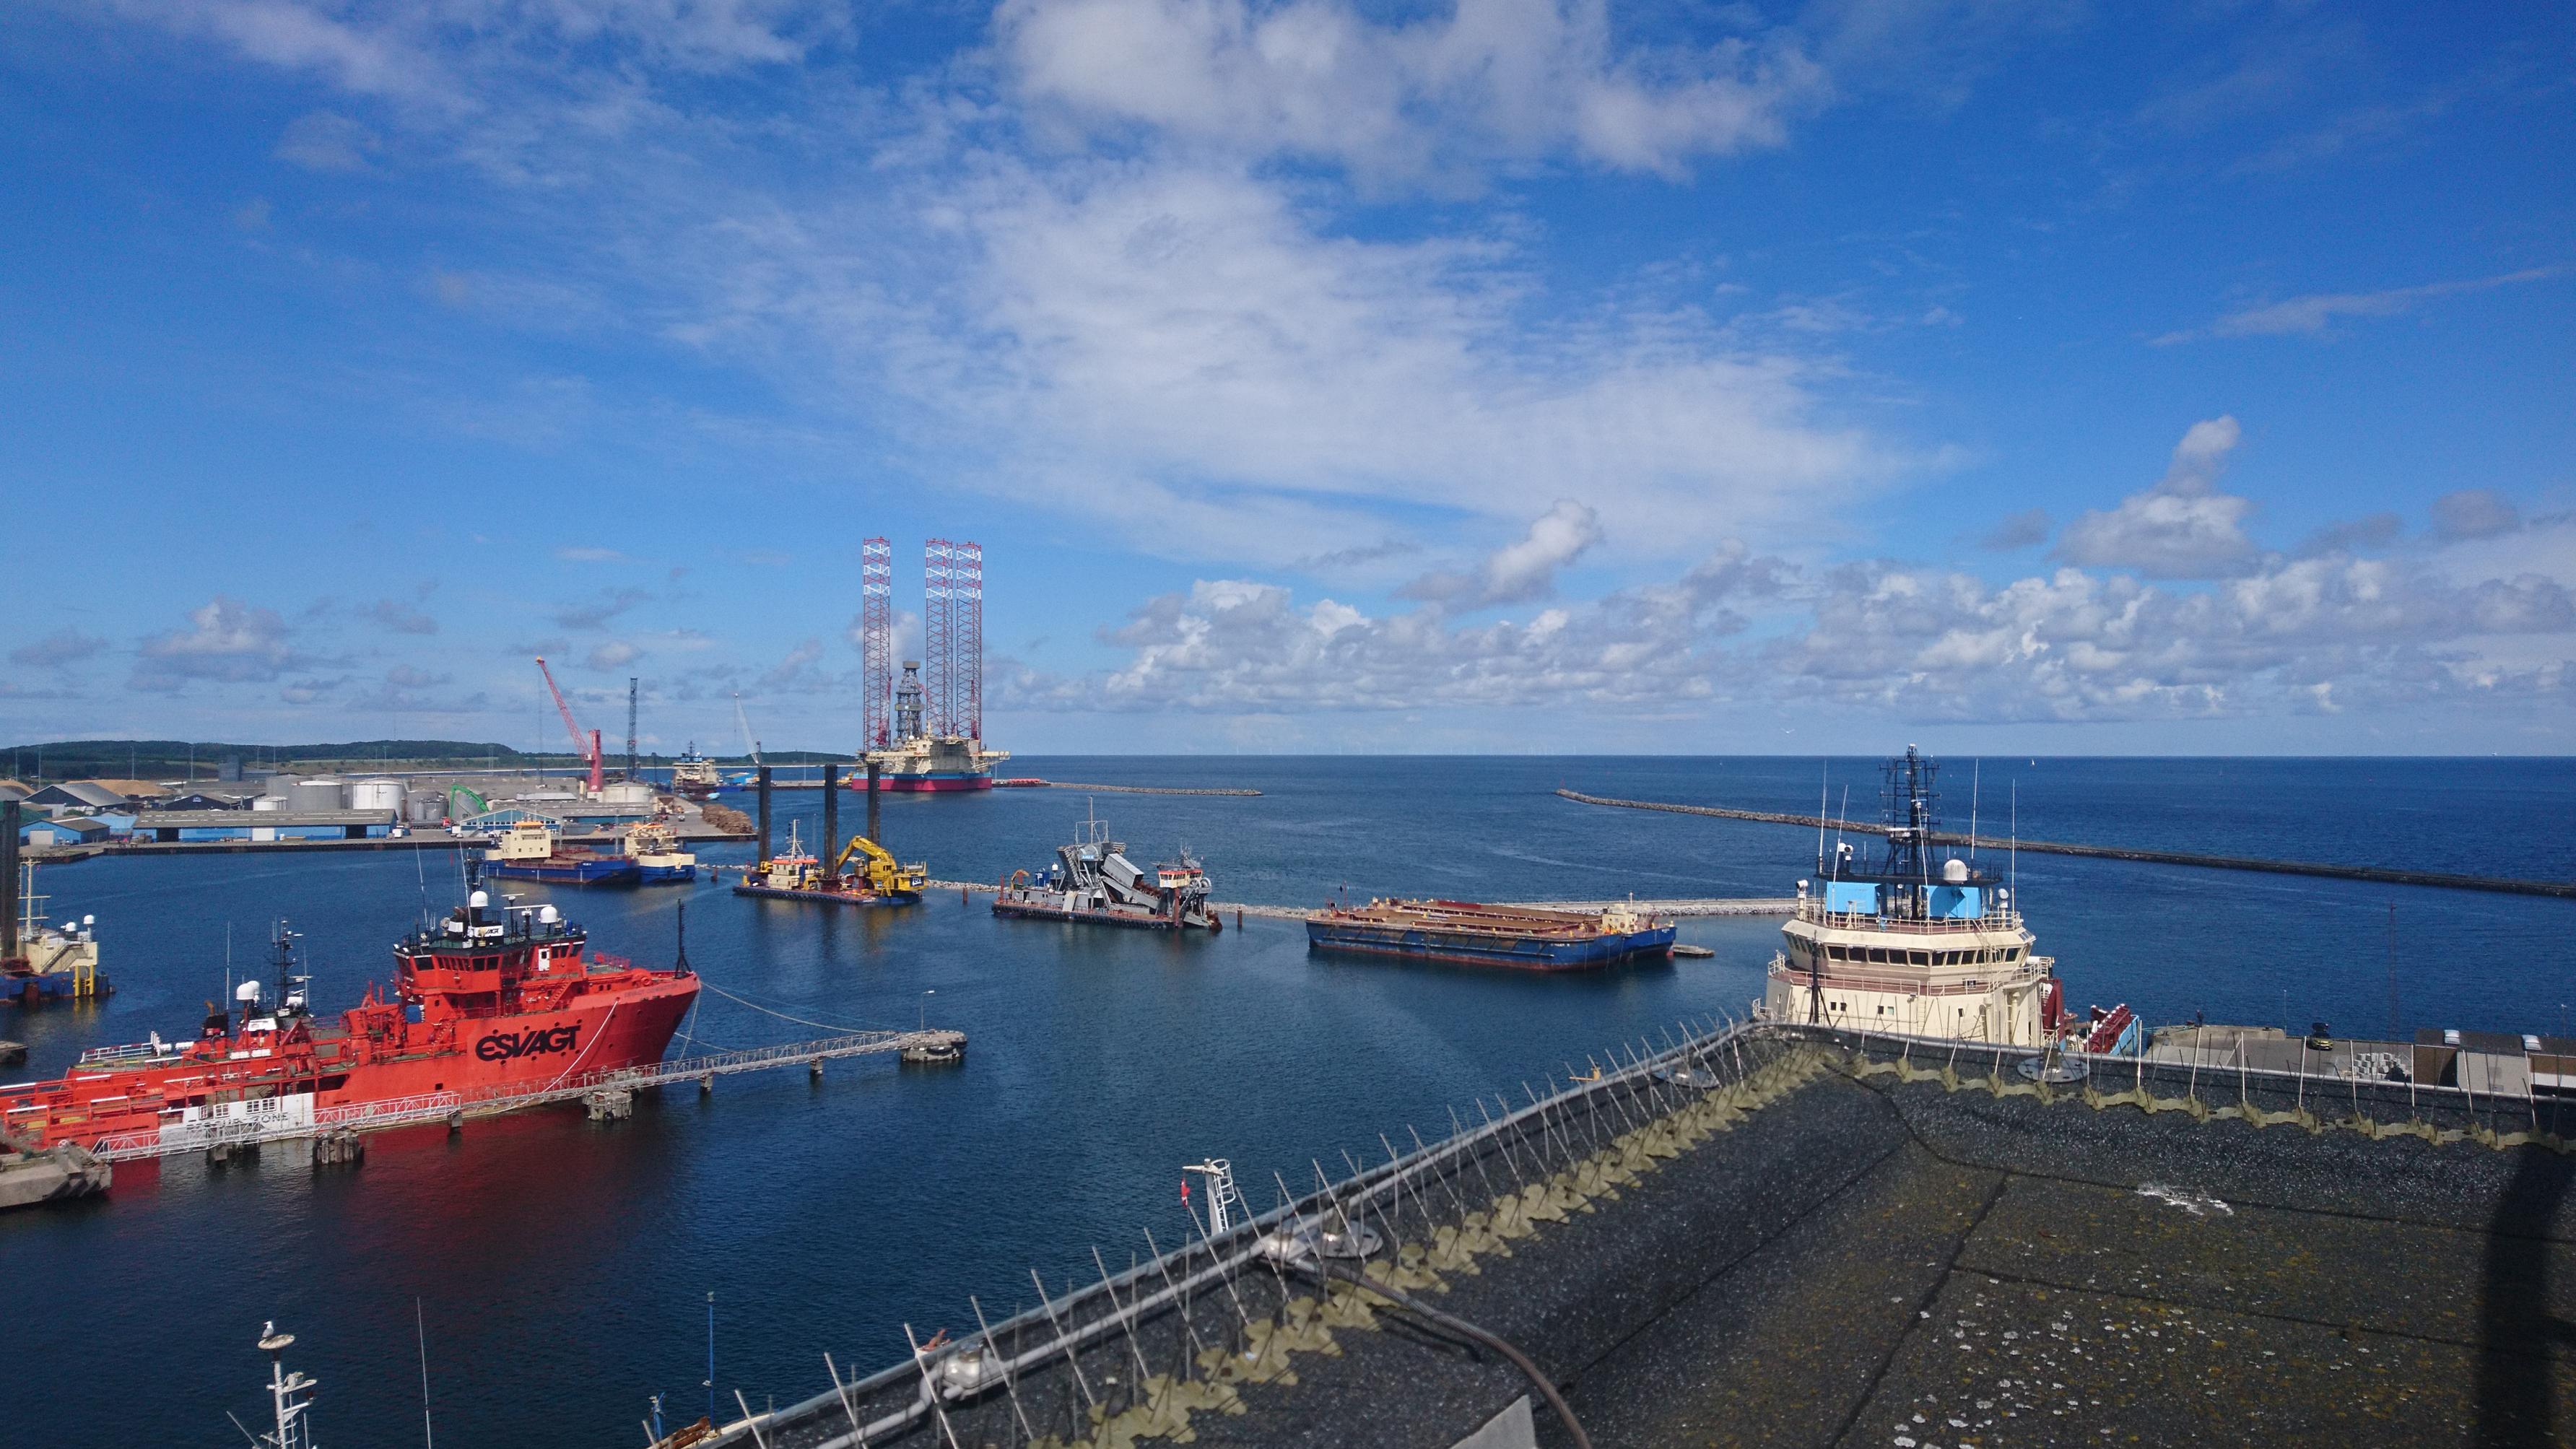 Product RigiTech Tests Drone Delivery Service to Offshore Substation at Ørsted’s Anholt Offshore Wind Farm, with Eiger Drone Operated Remotely from Copenhagen￼ - RigiTech - Drone Delivery Solutions image